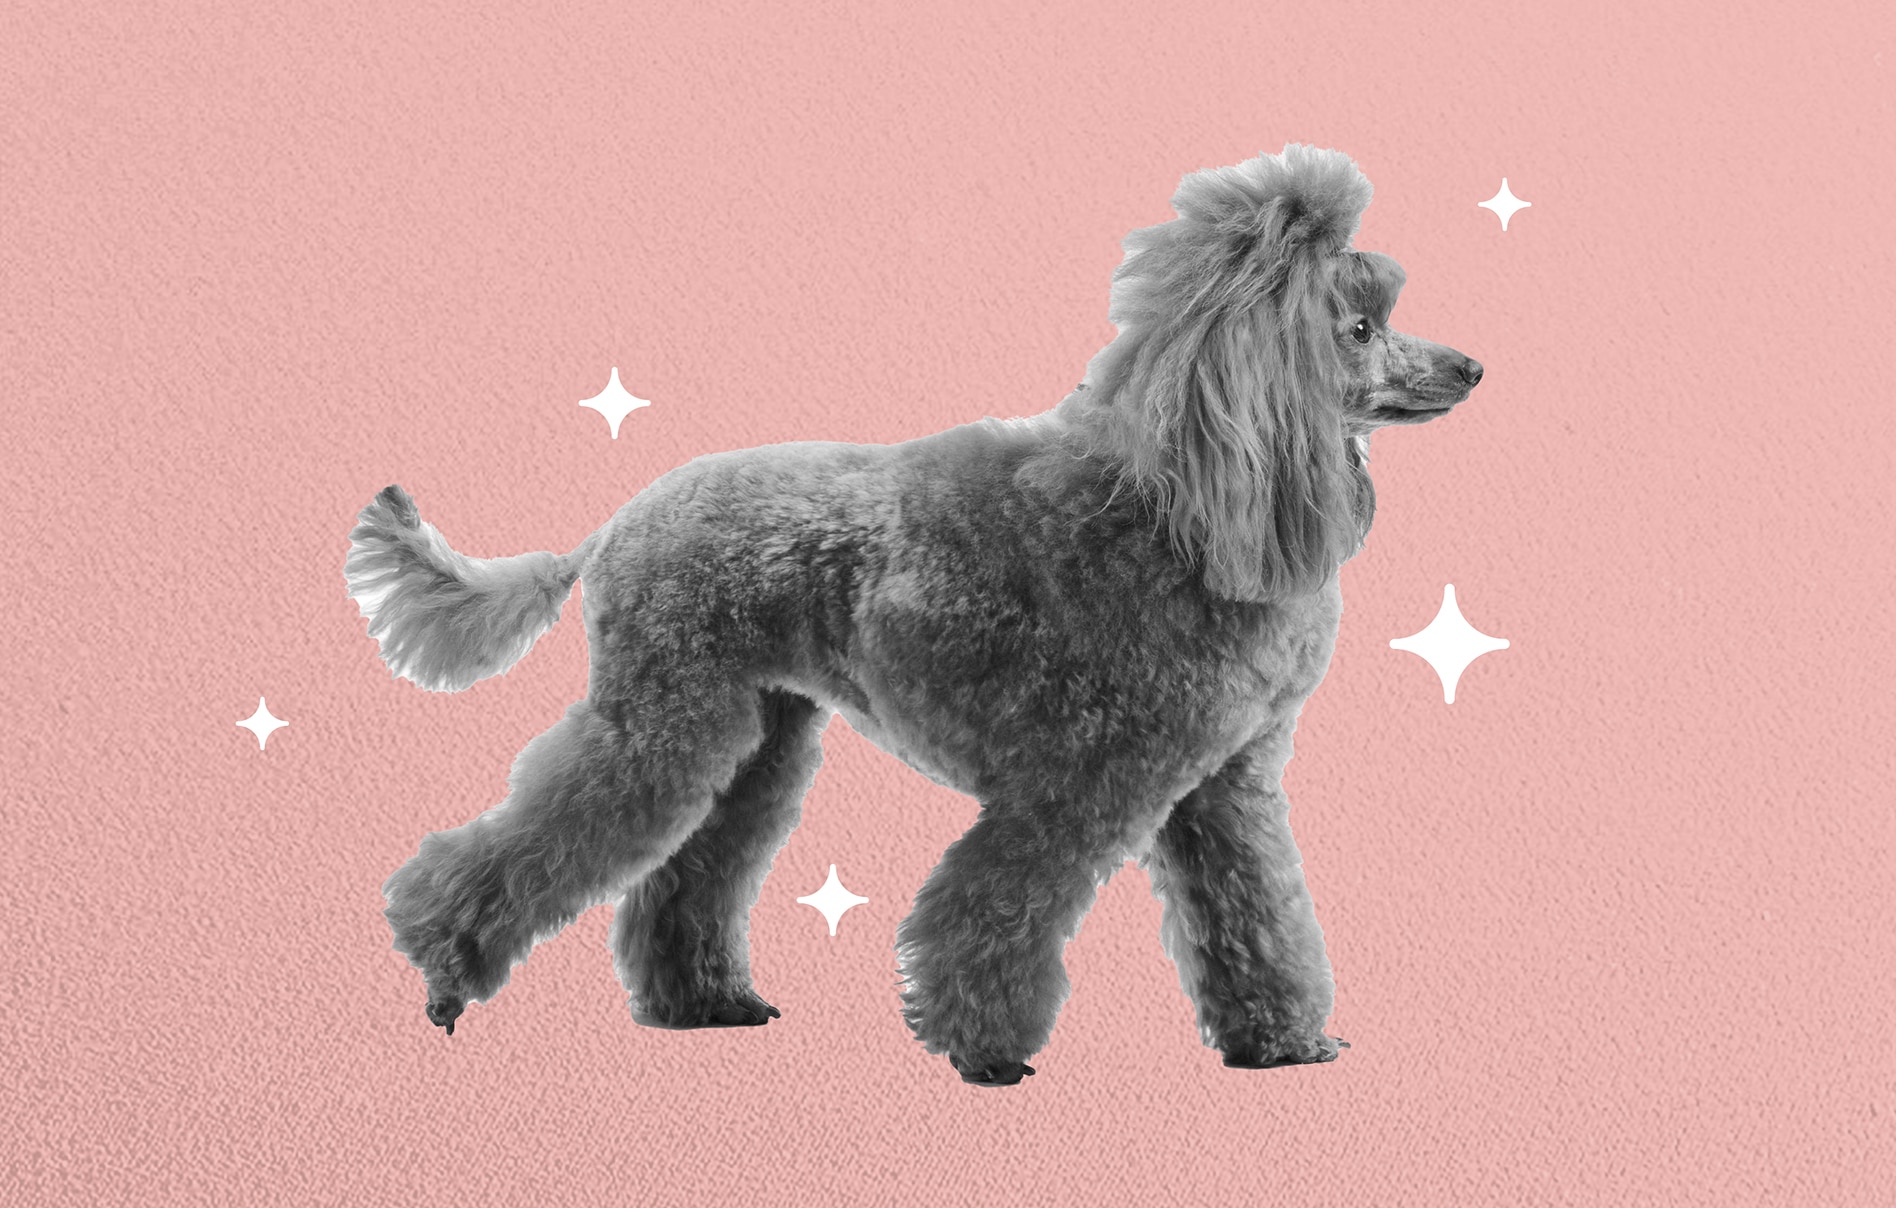 A well-groomed dog with sparkling beauty